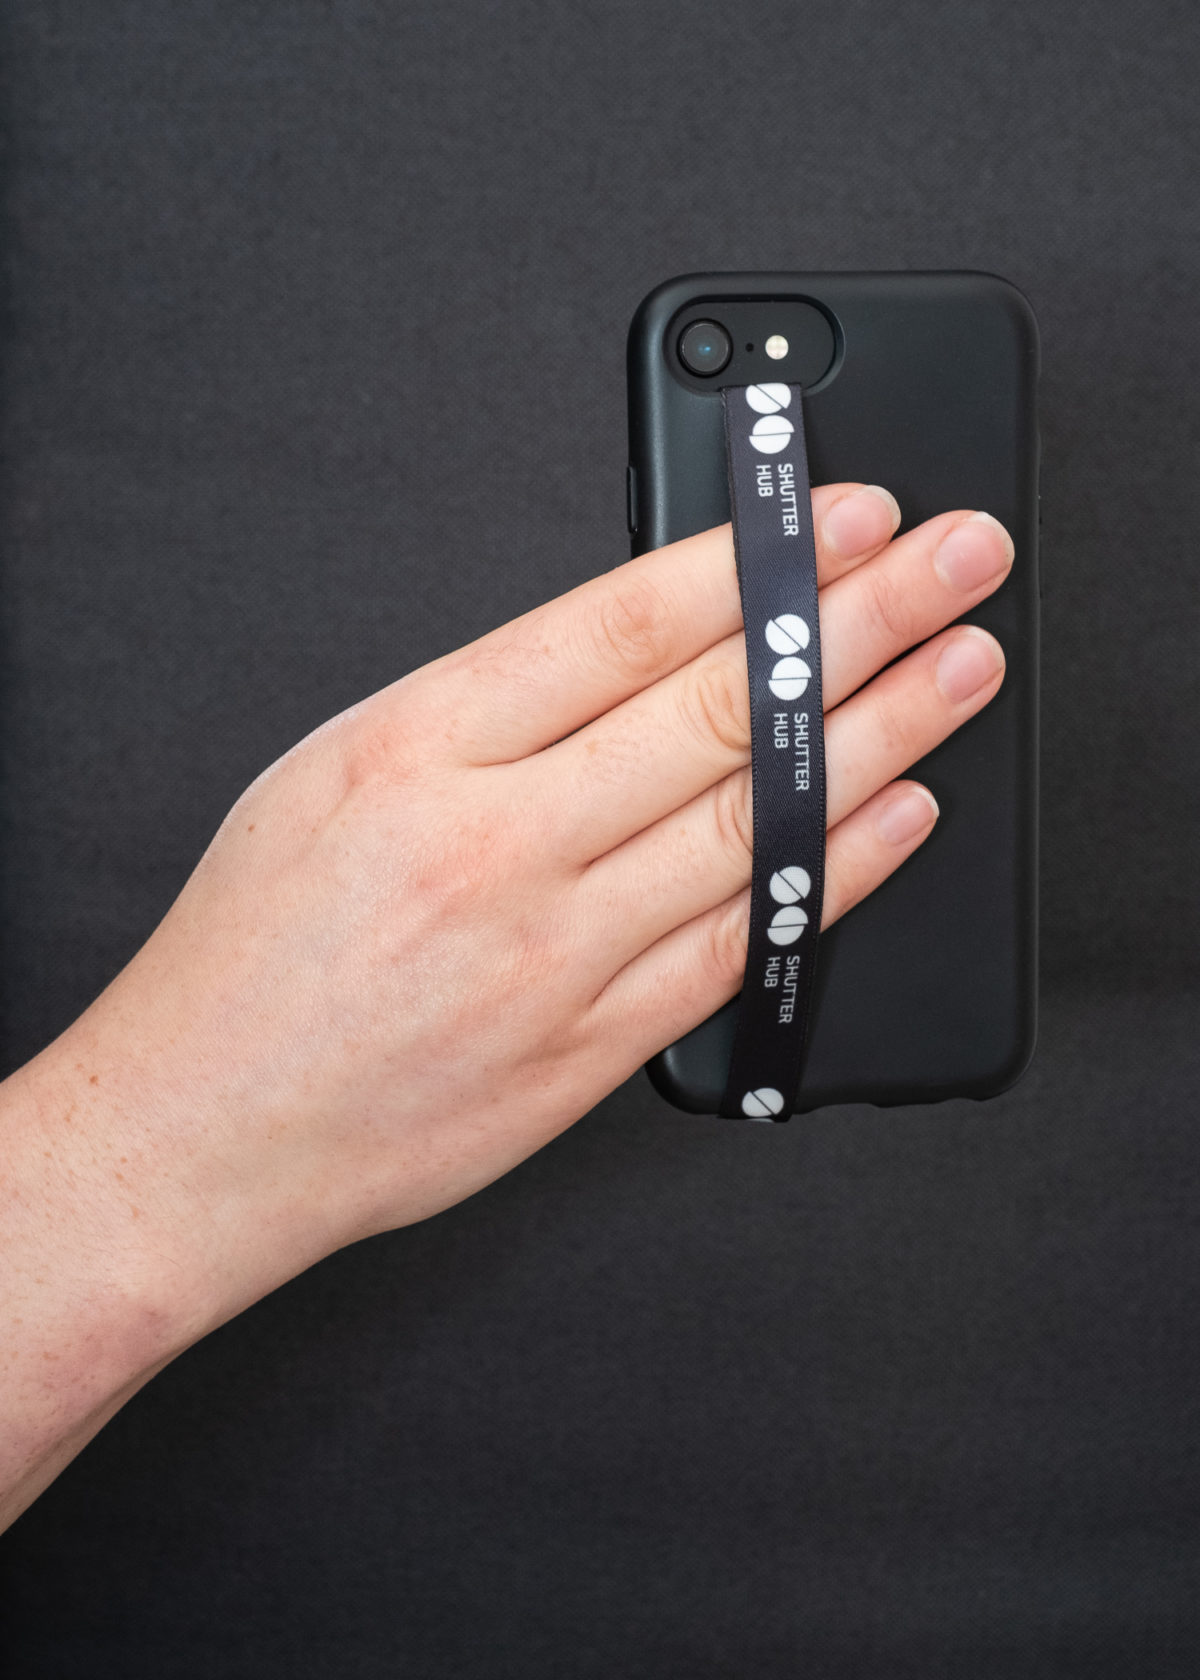 Hand holding a Shutter Hub Phone Loop attached to a black phone case, with the Shutter Hub logo